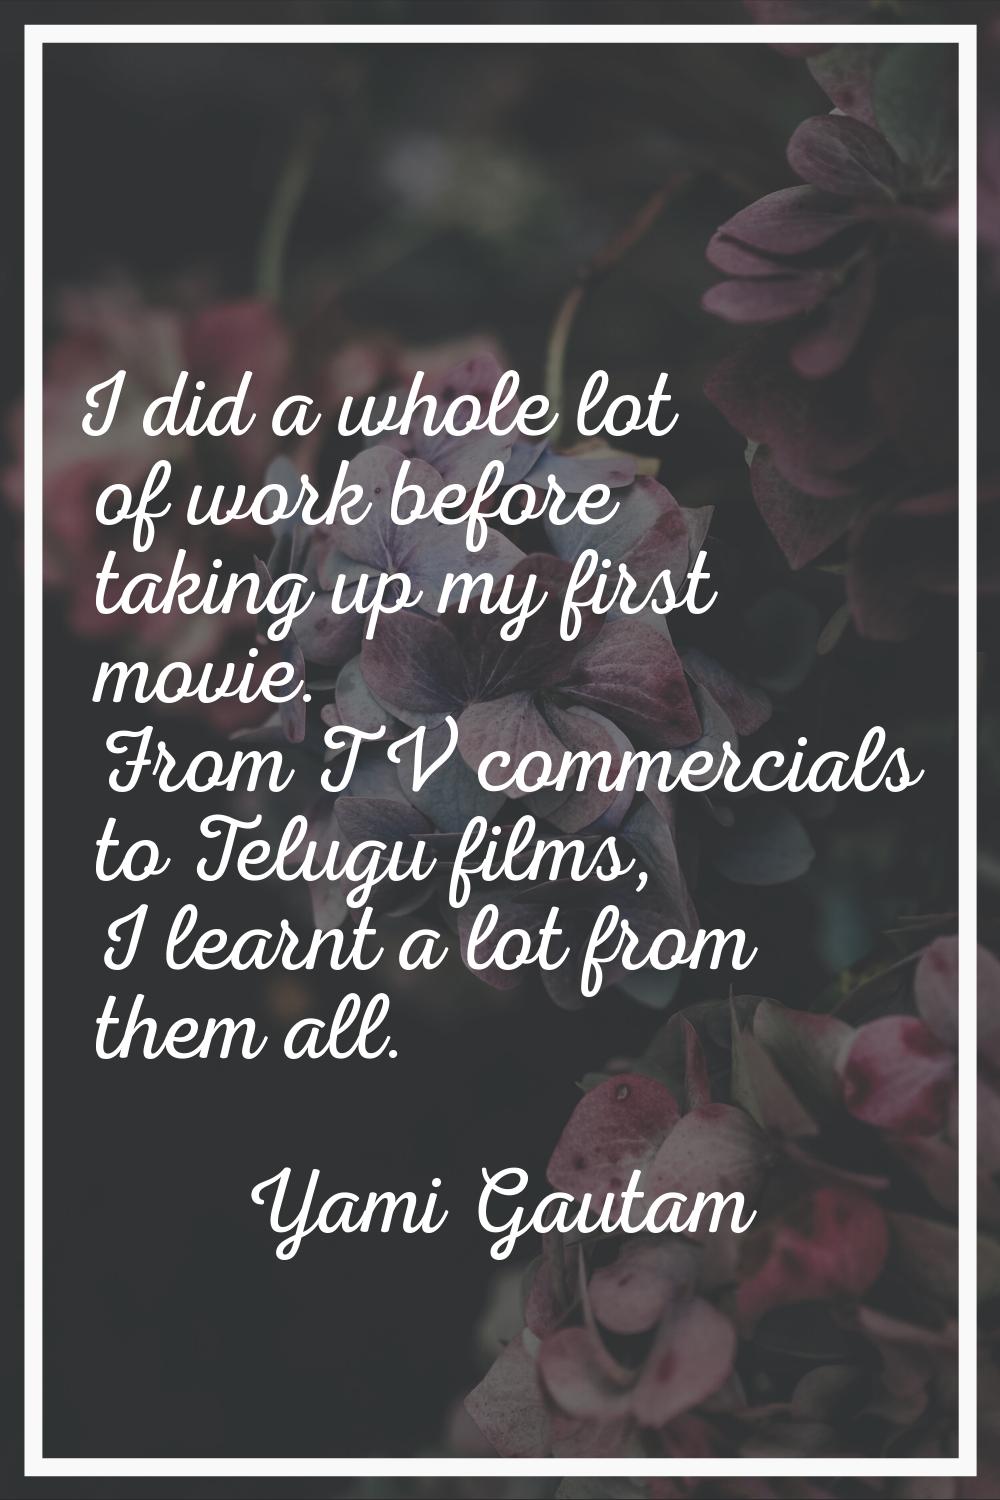 I did a whole lot of work before taking up my first movie. From TV commercials to Telugu films, I l